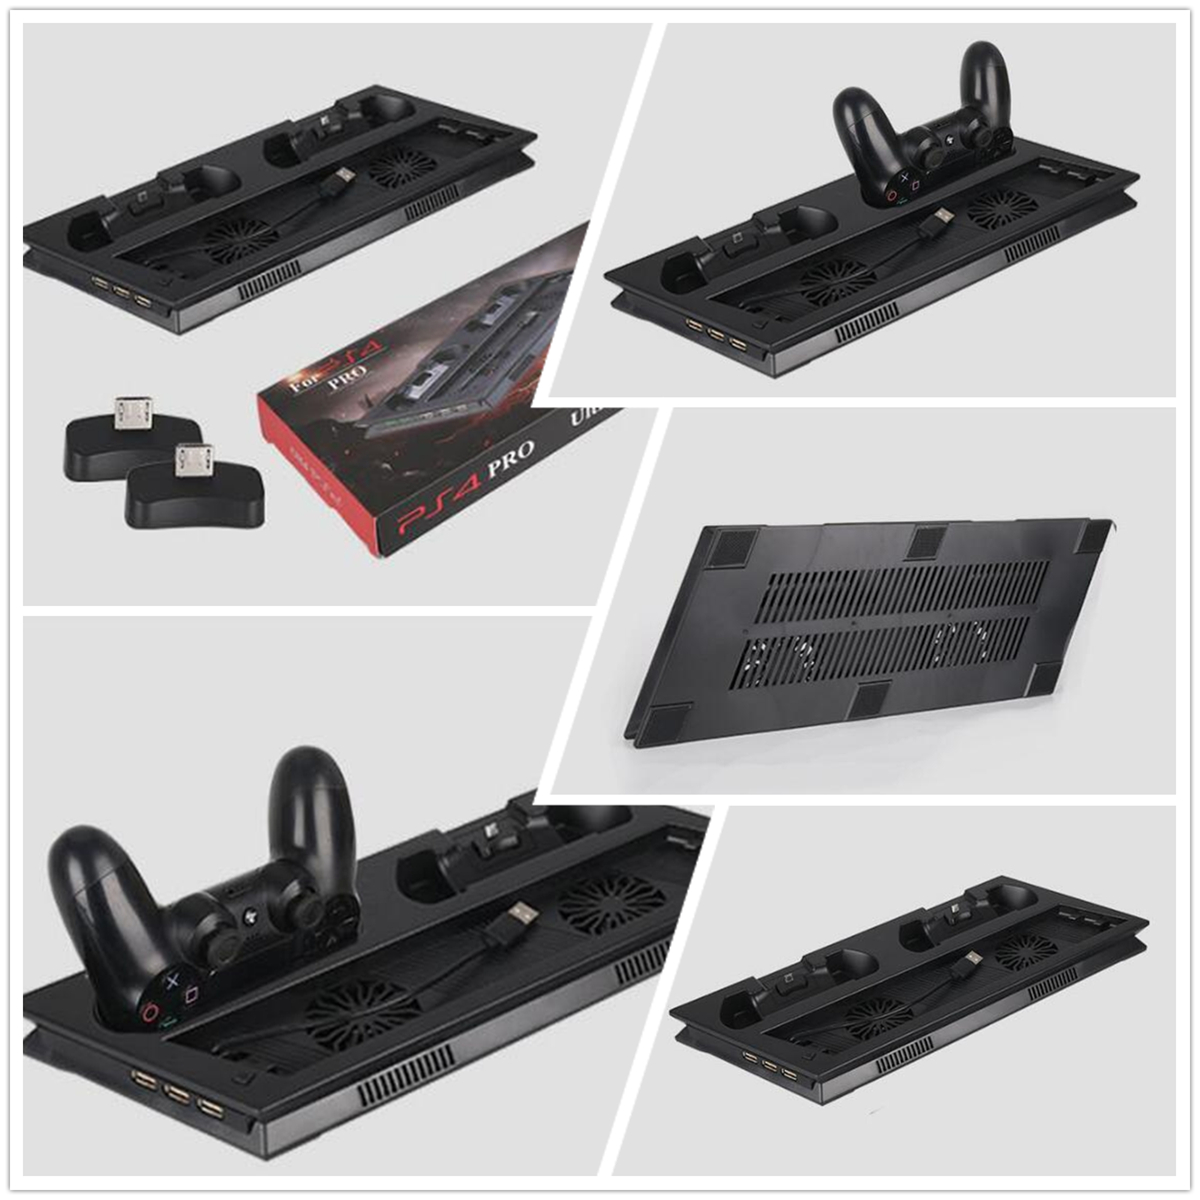 LED Charger Station Stand Charging Dock Cooling Fan for Sony Playstation 4 PS4 PRO Slim Game Console Gamepad 51